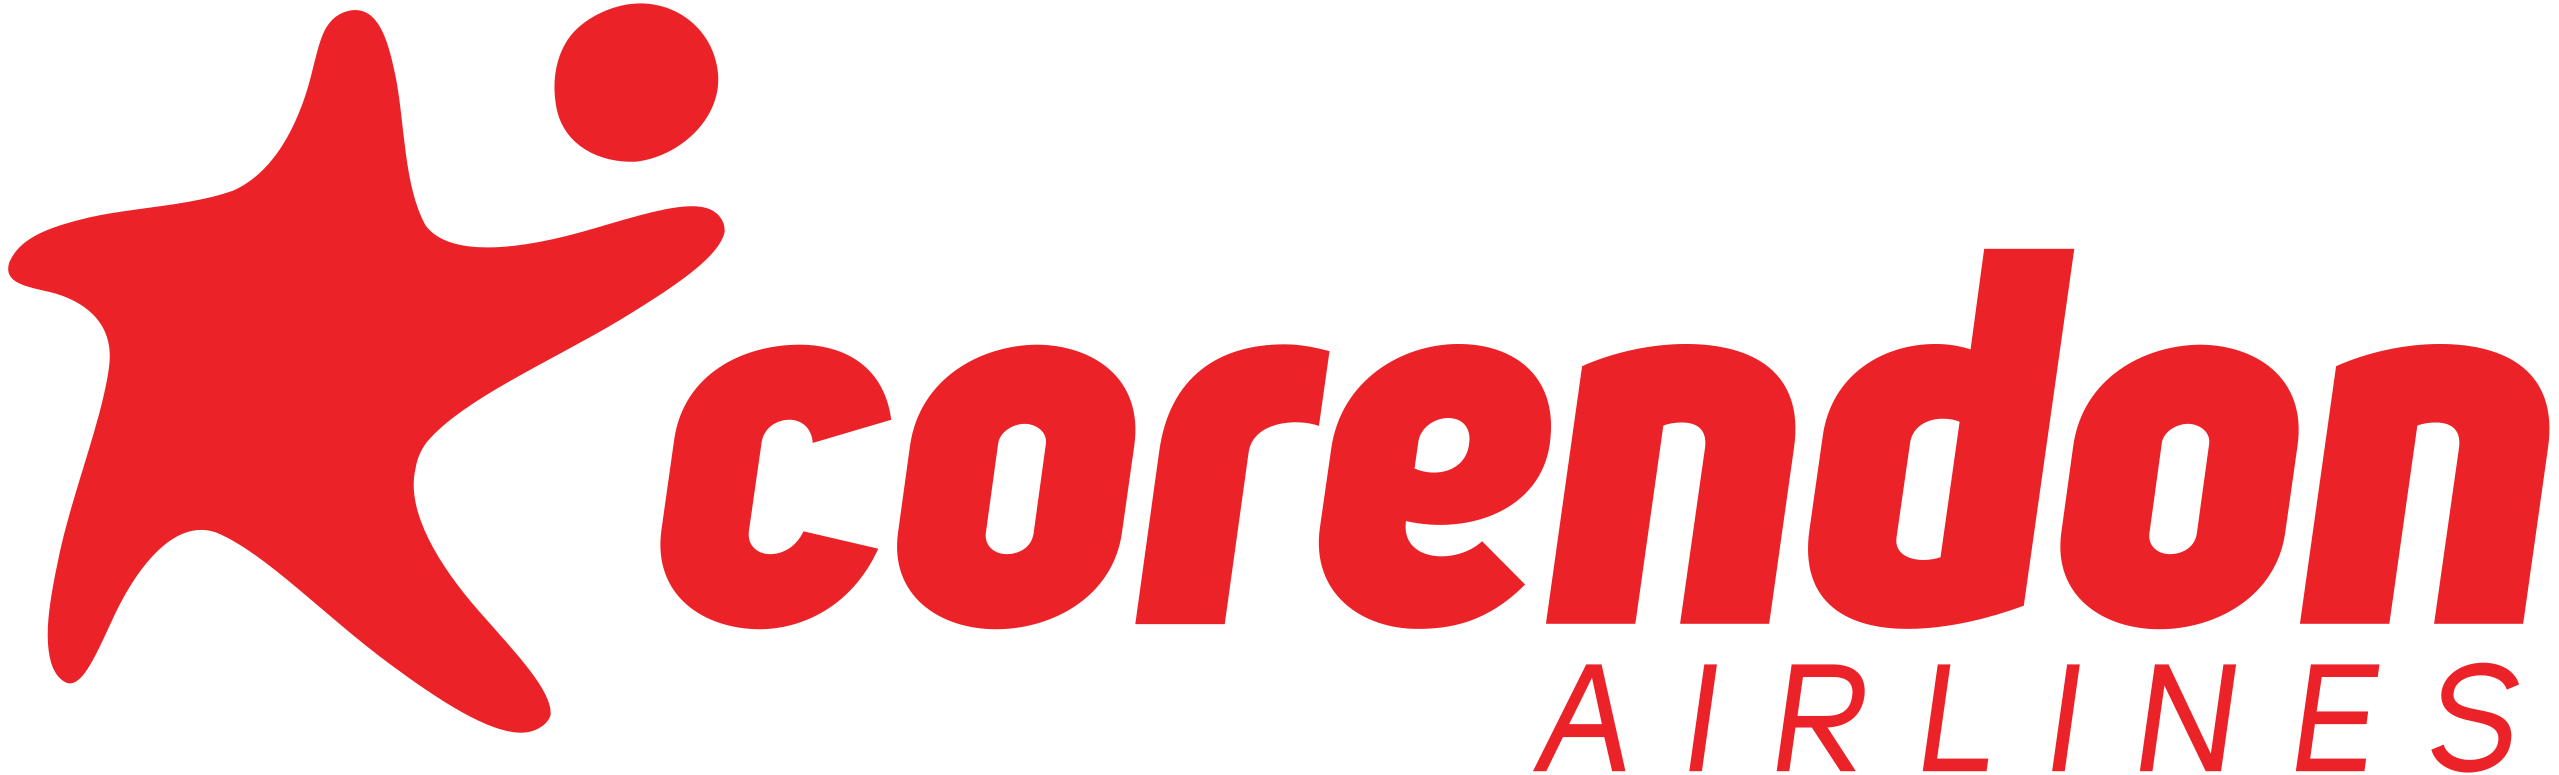 cropped cropped cropped 2560px Corendon Airlines Logo 2017.svg 